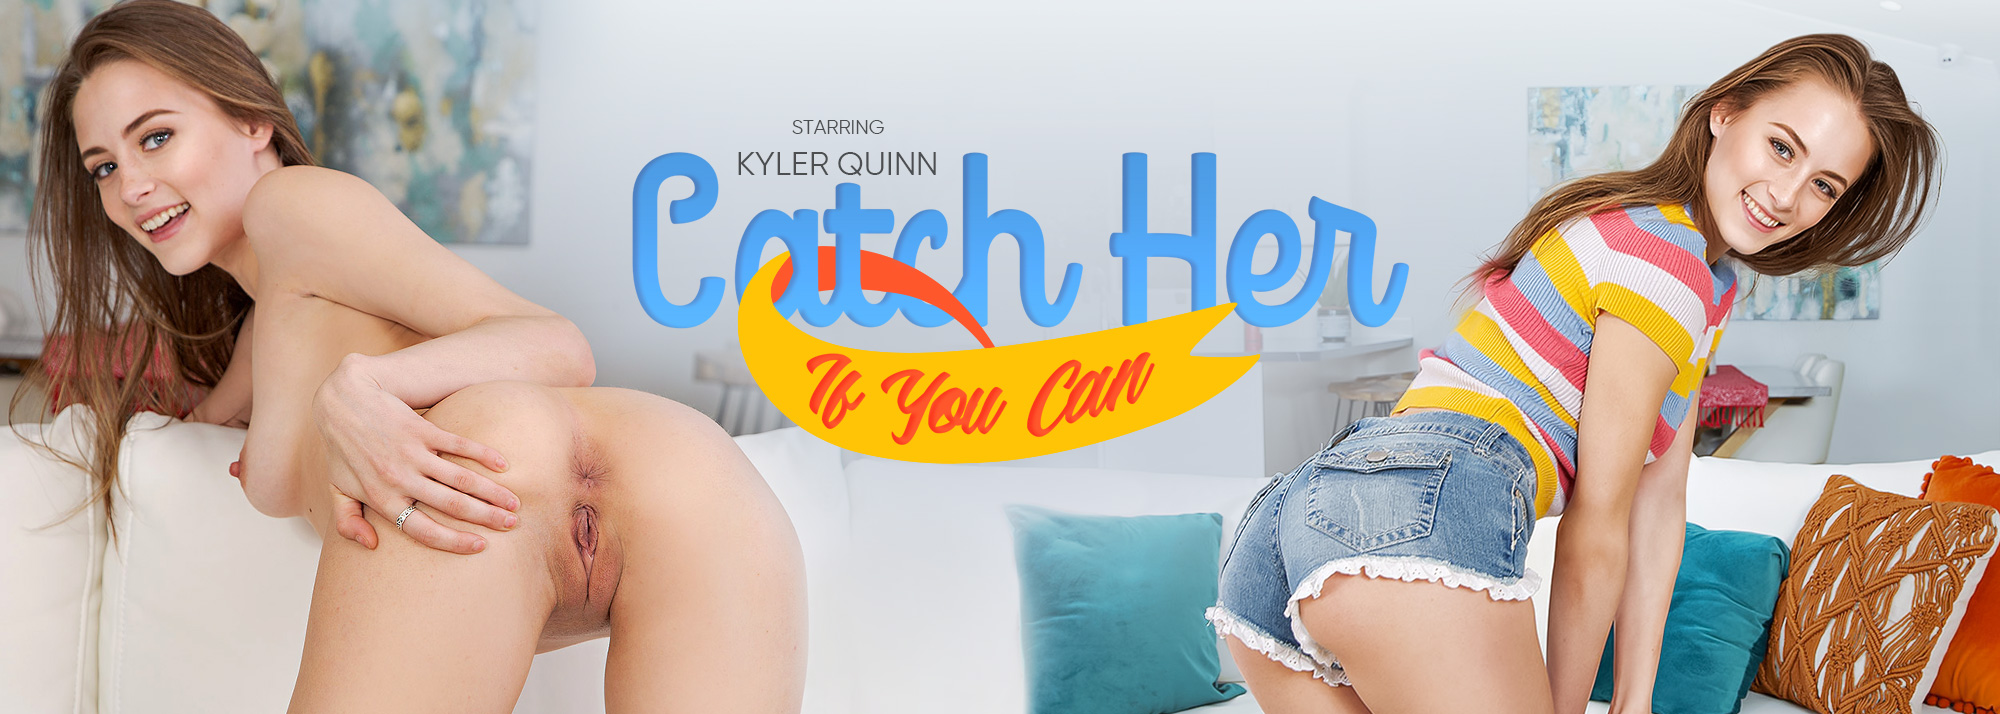 Catch Her If You Can - VR Porn Video, Starring: Kyler Quinn